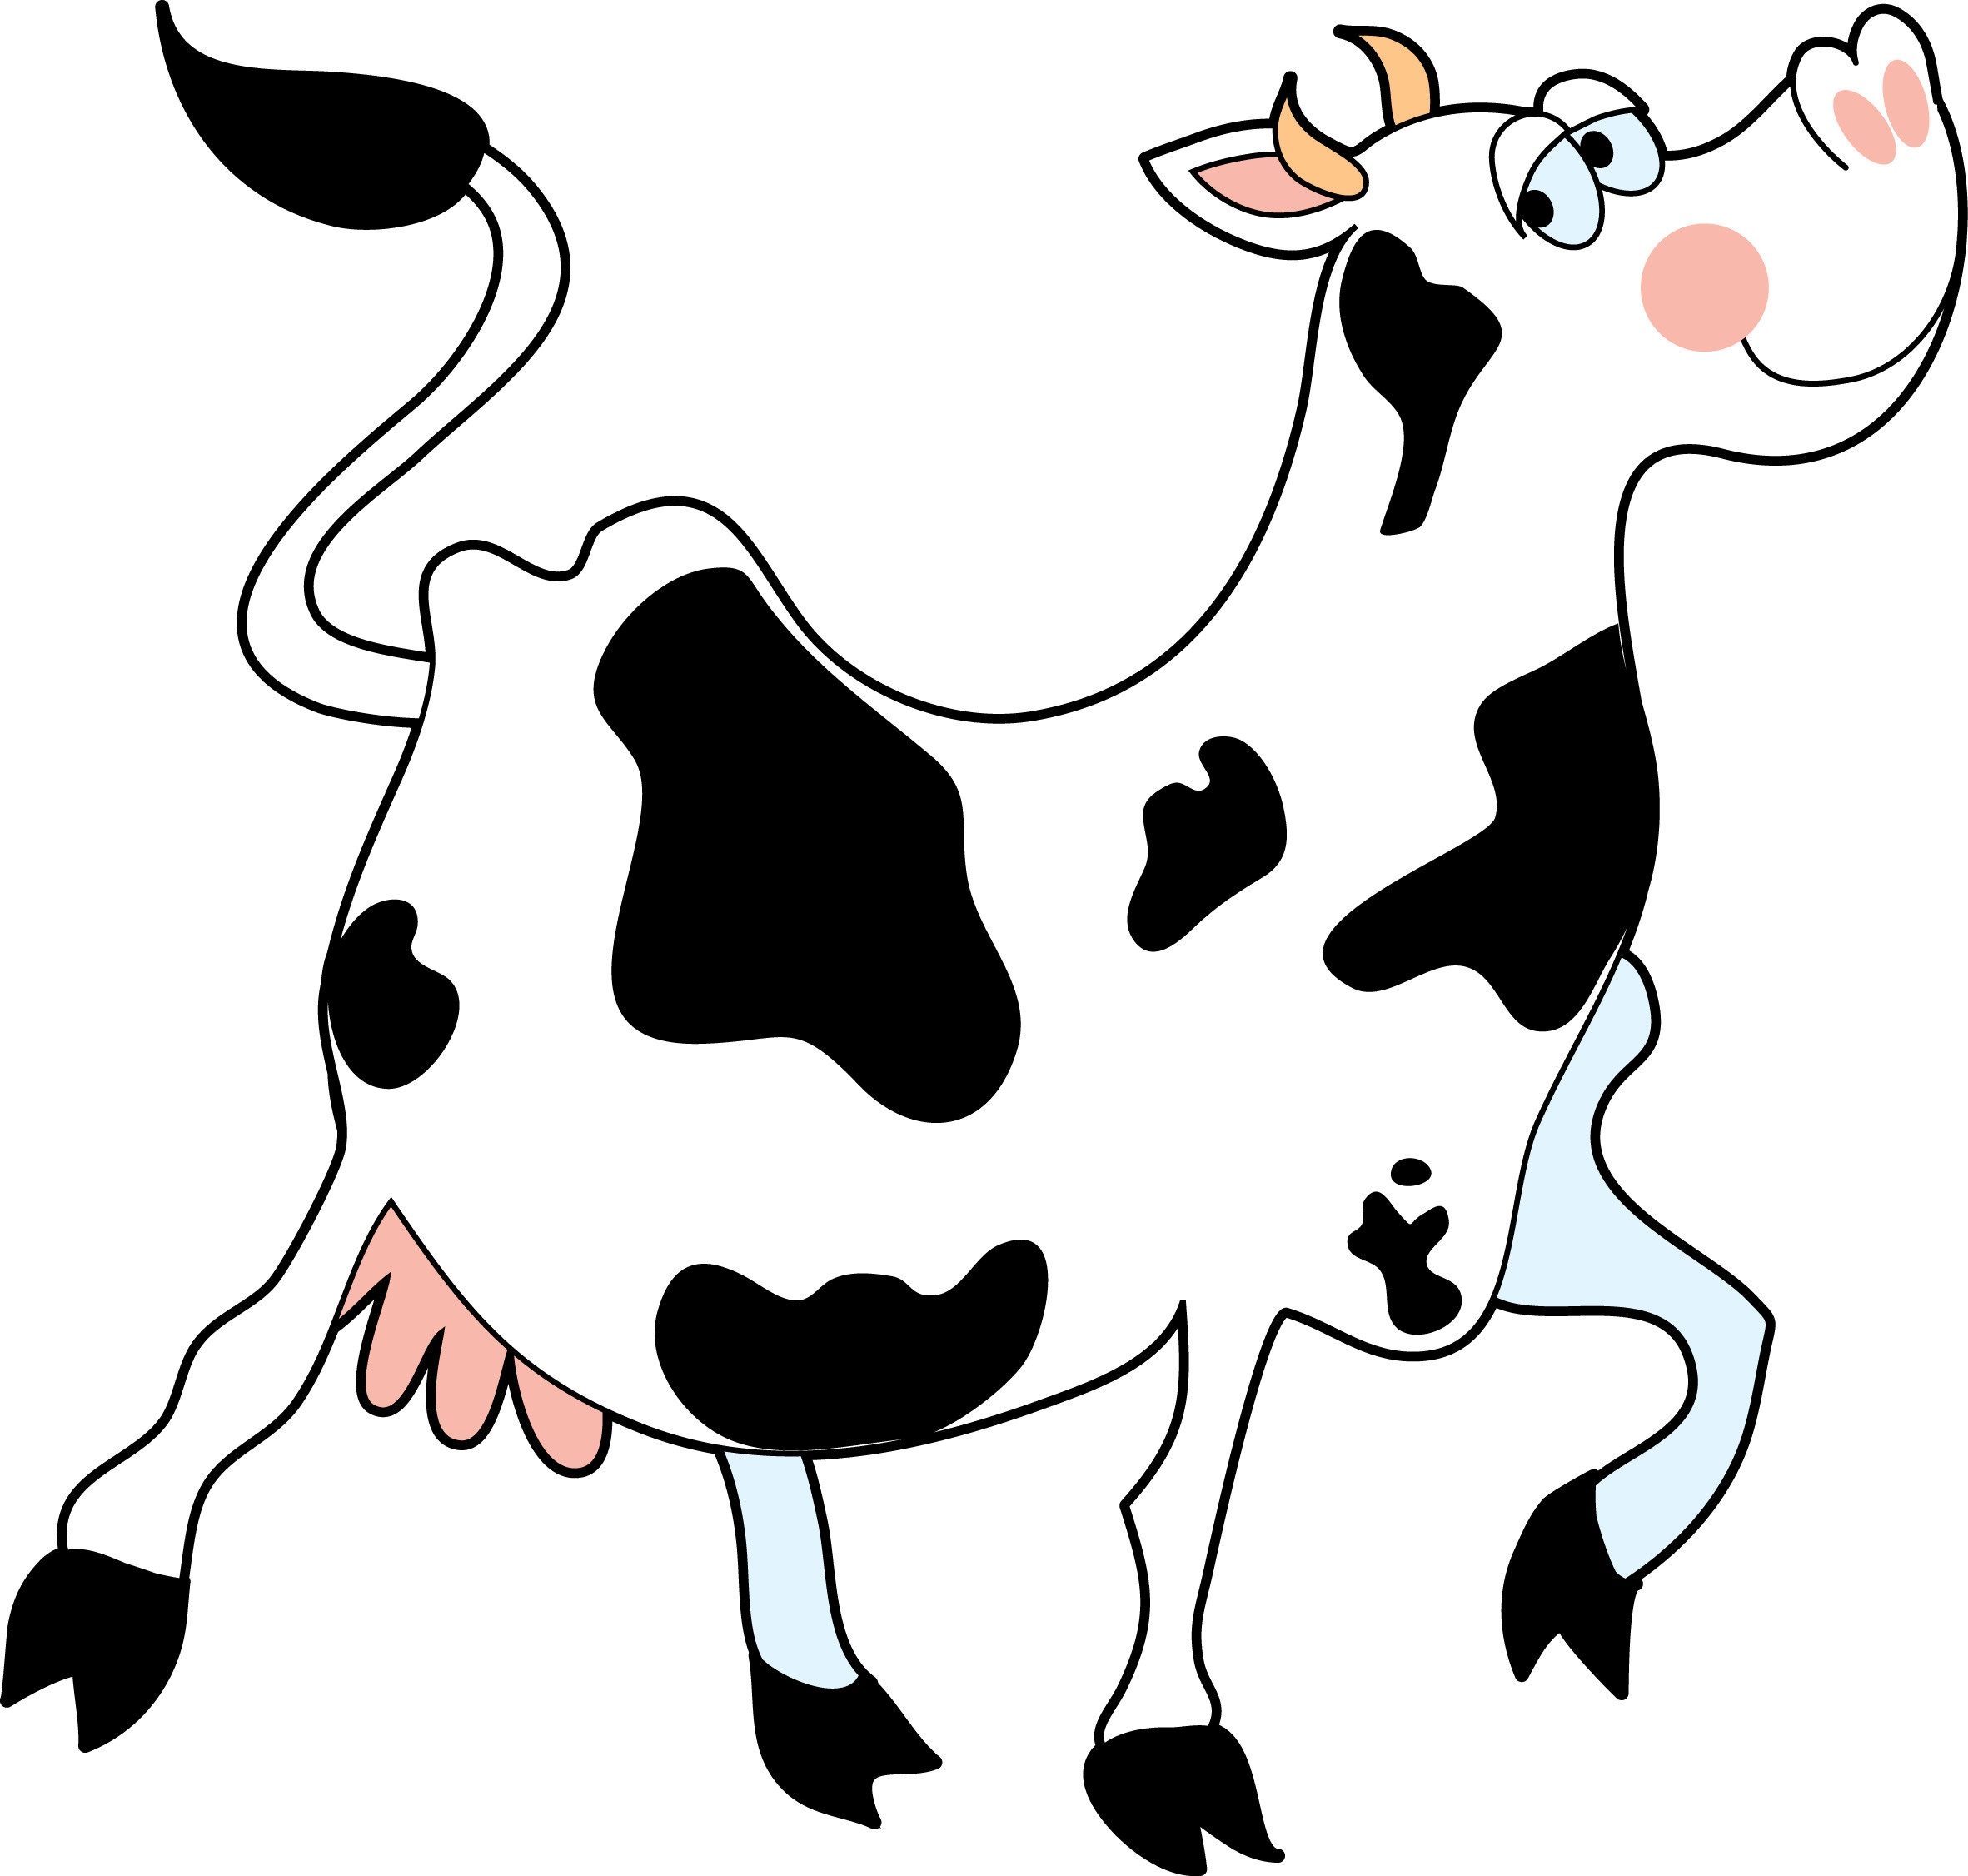 Free Cow Images Clipart, Download Free Clip Art, Free Clip.